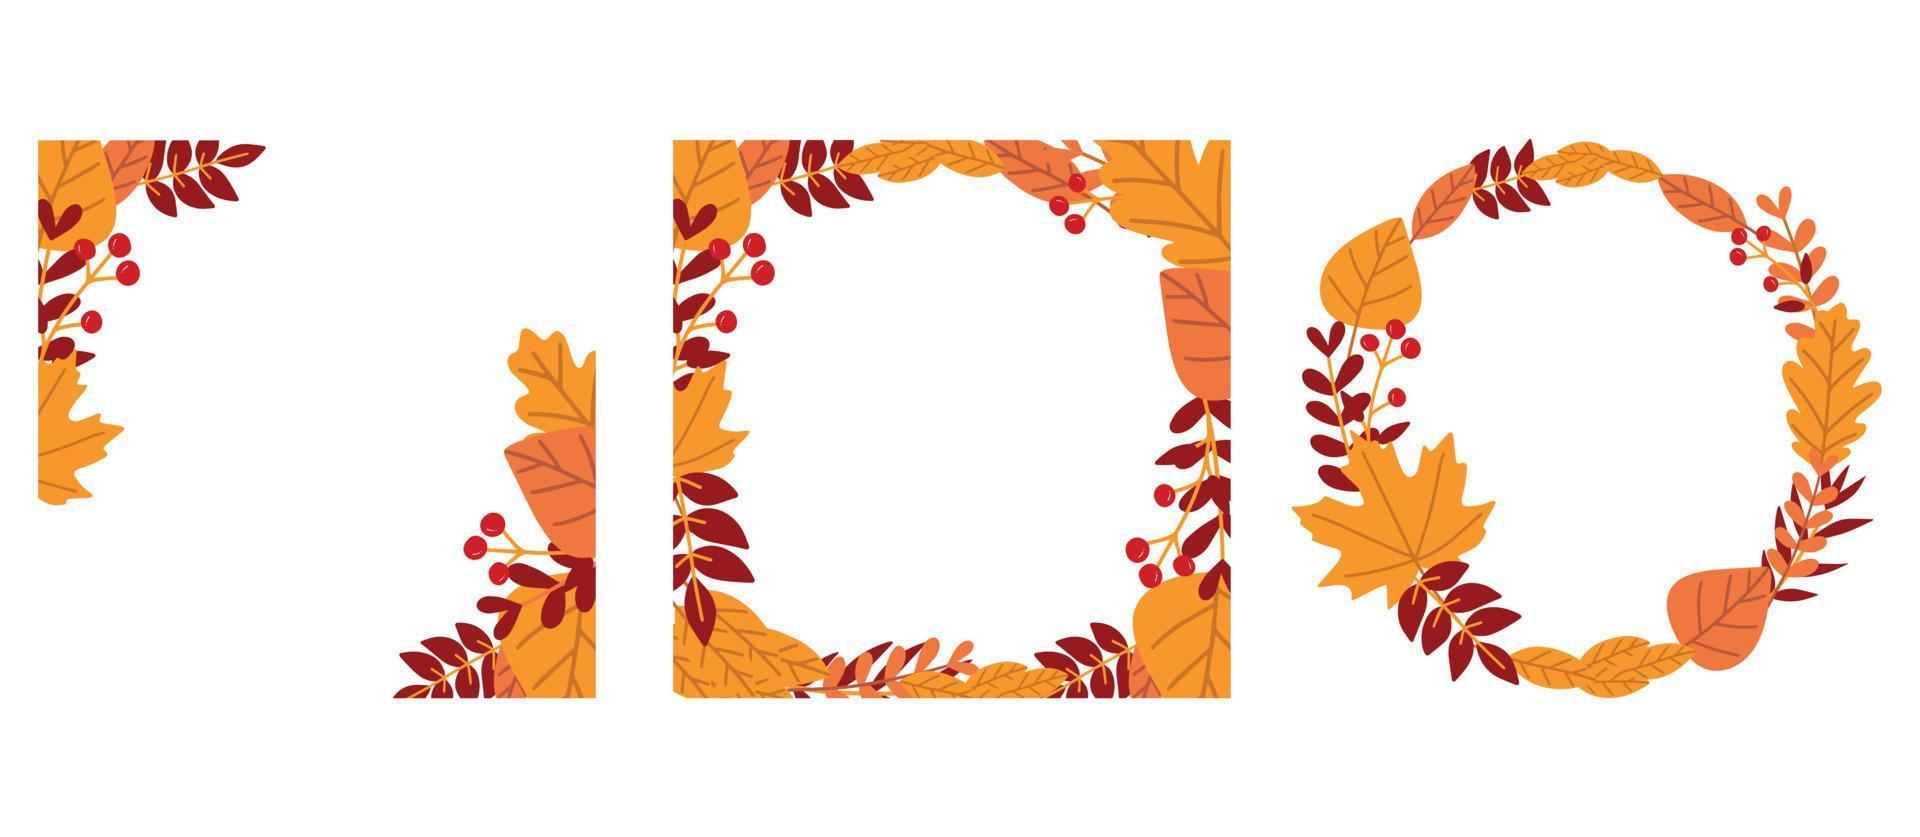 Autumn leaves frames collection. Autumnal wreath illustration with colorful leaves on white background. vector